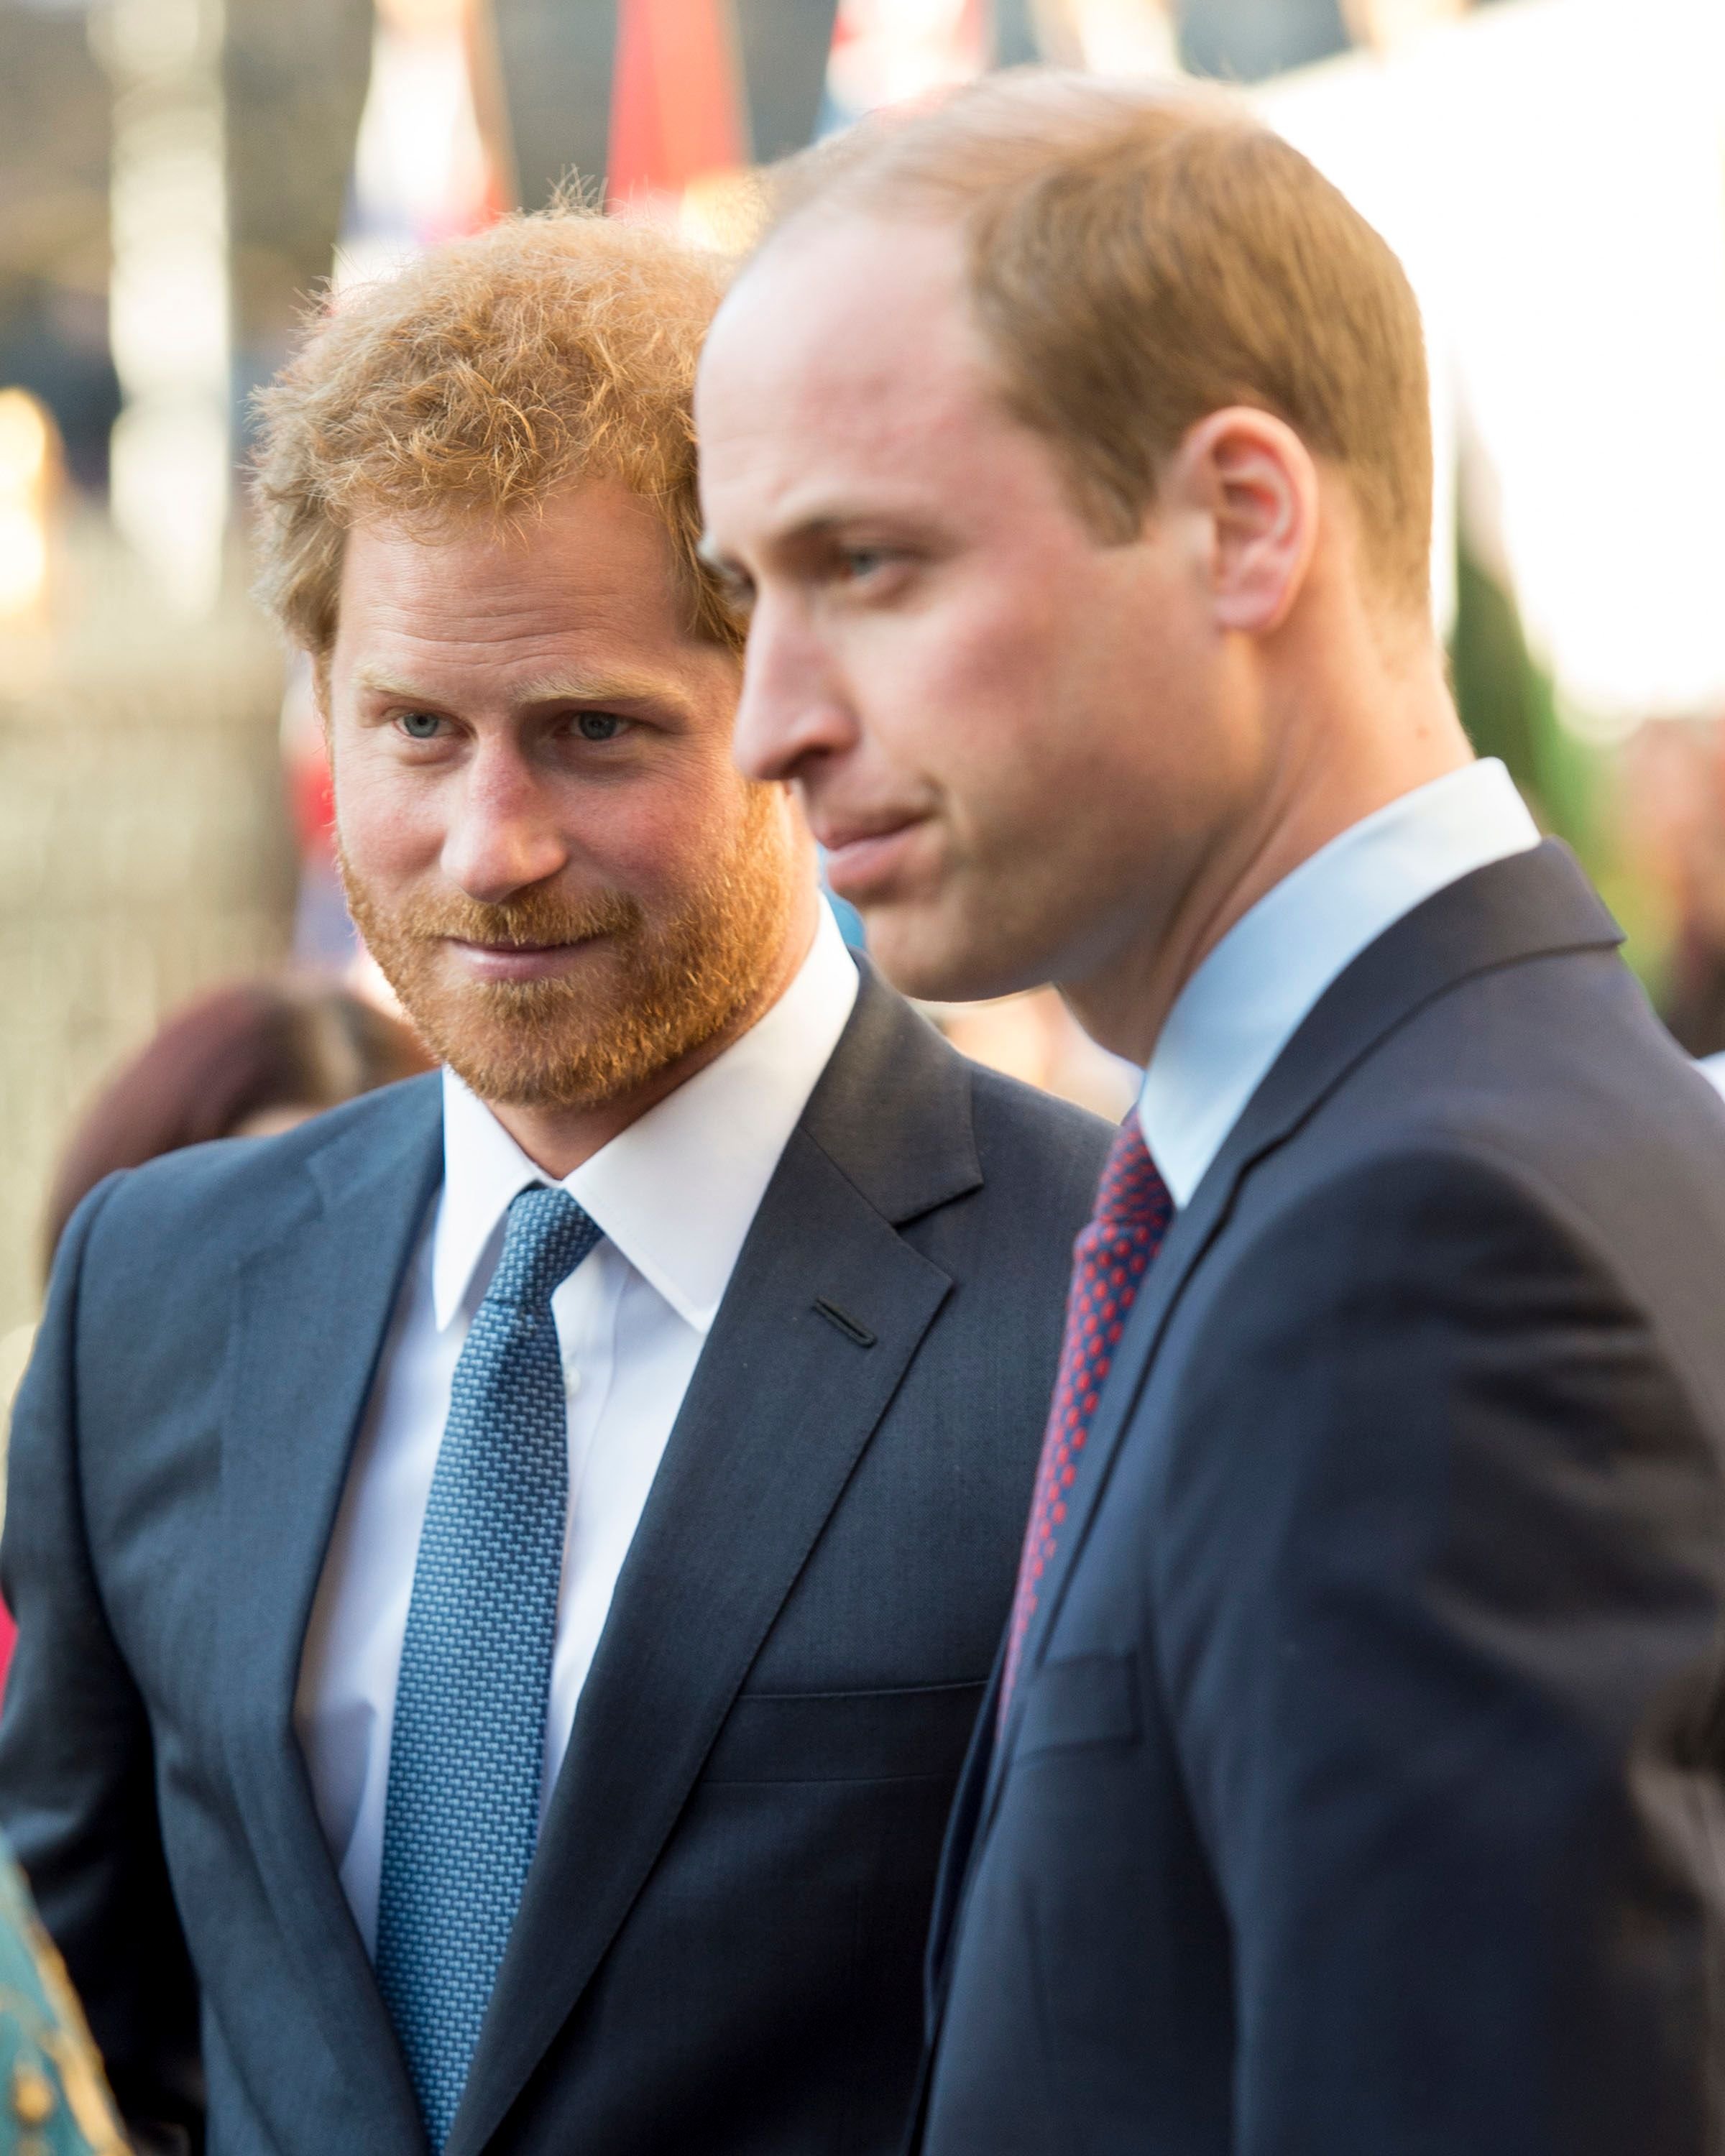 Prince Harry and Prince William at the Commonwealth Observance Day Service on March 14, 2016, in London, United Kingdom | Photo: Getty Images/Mark Cuthbert/UK Press